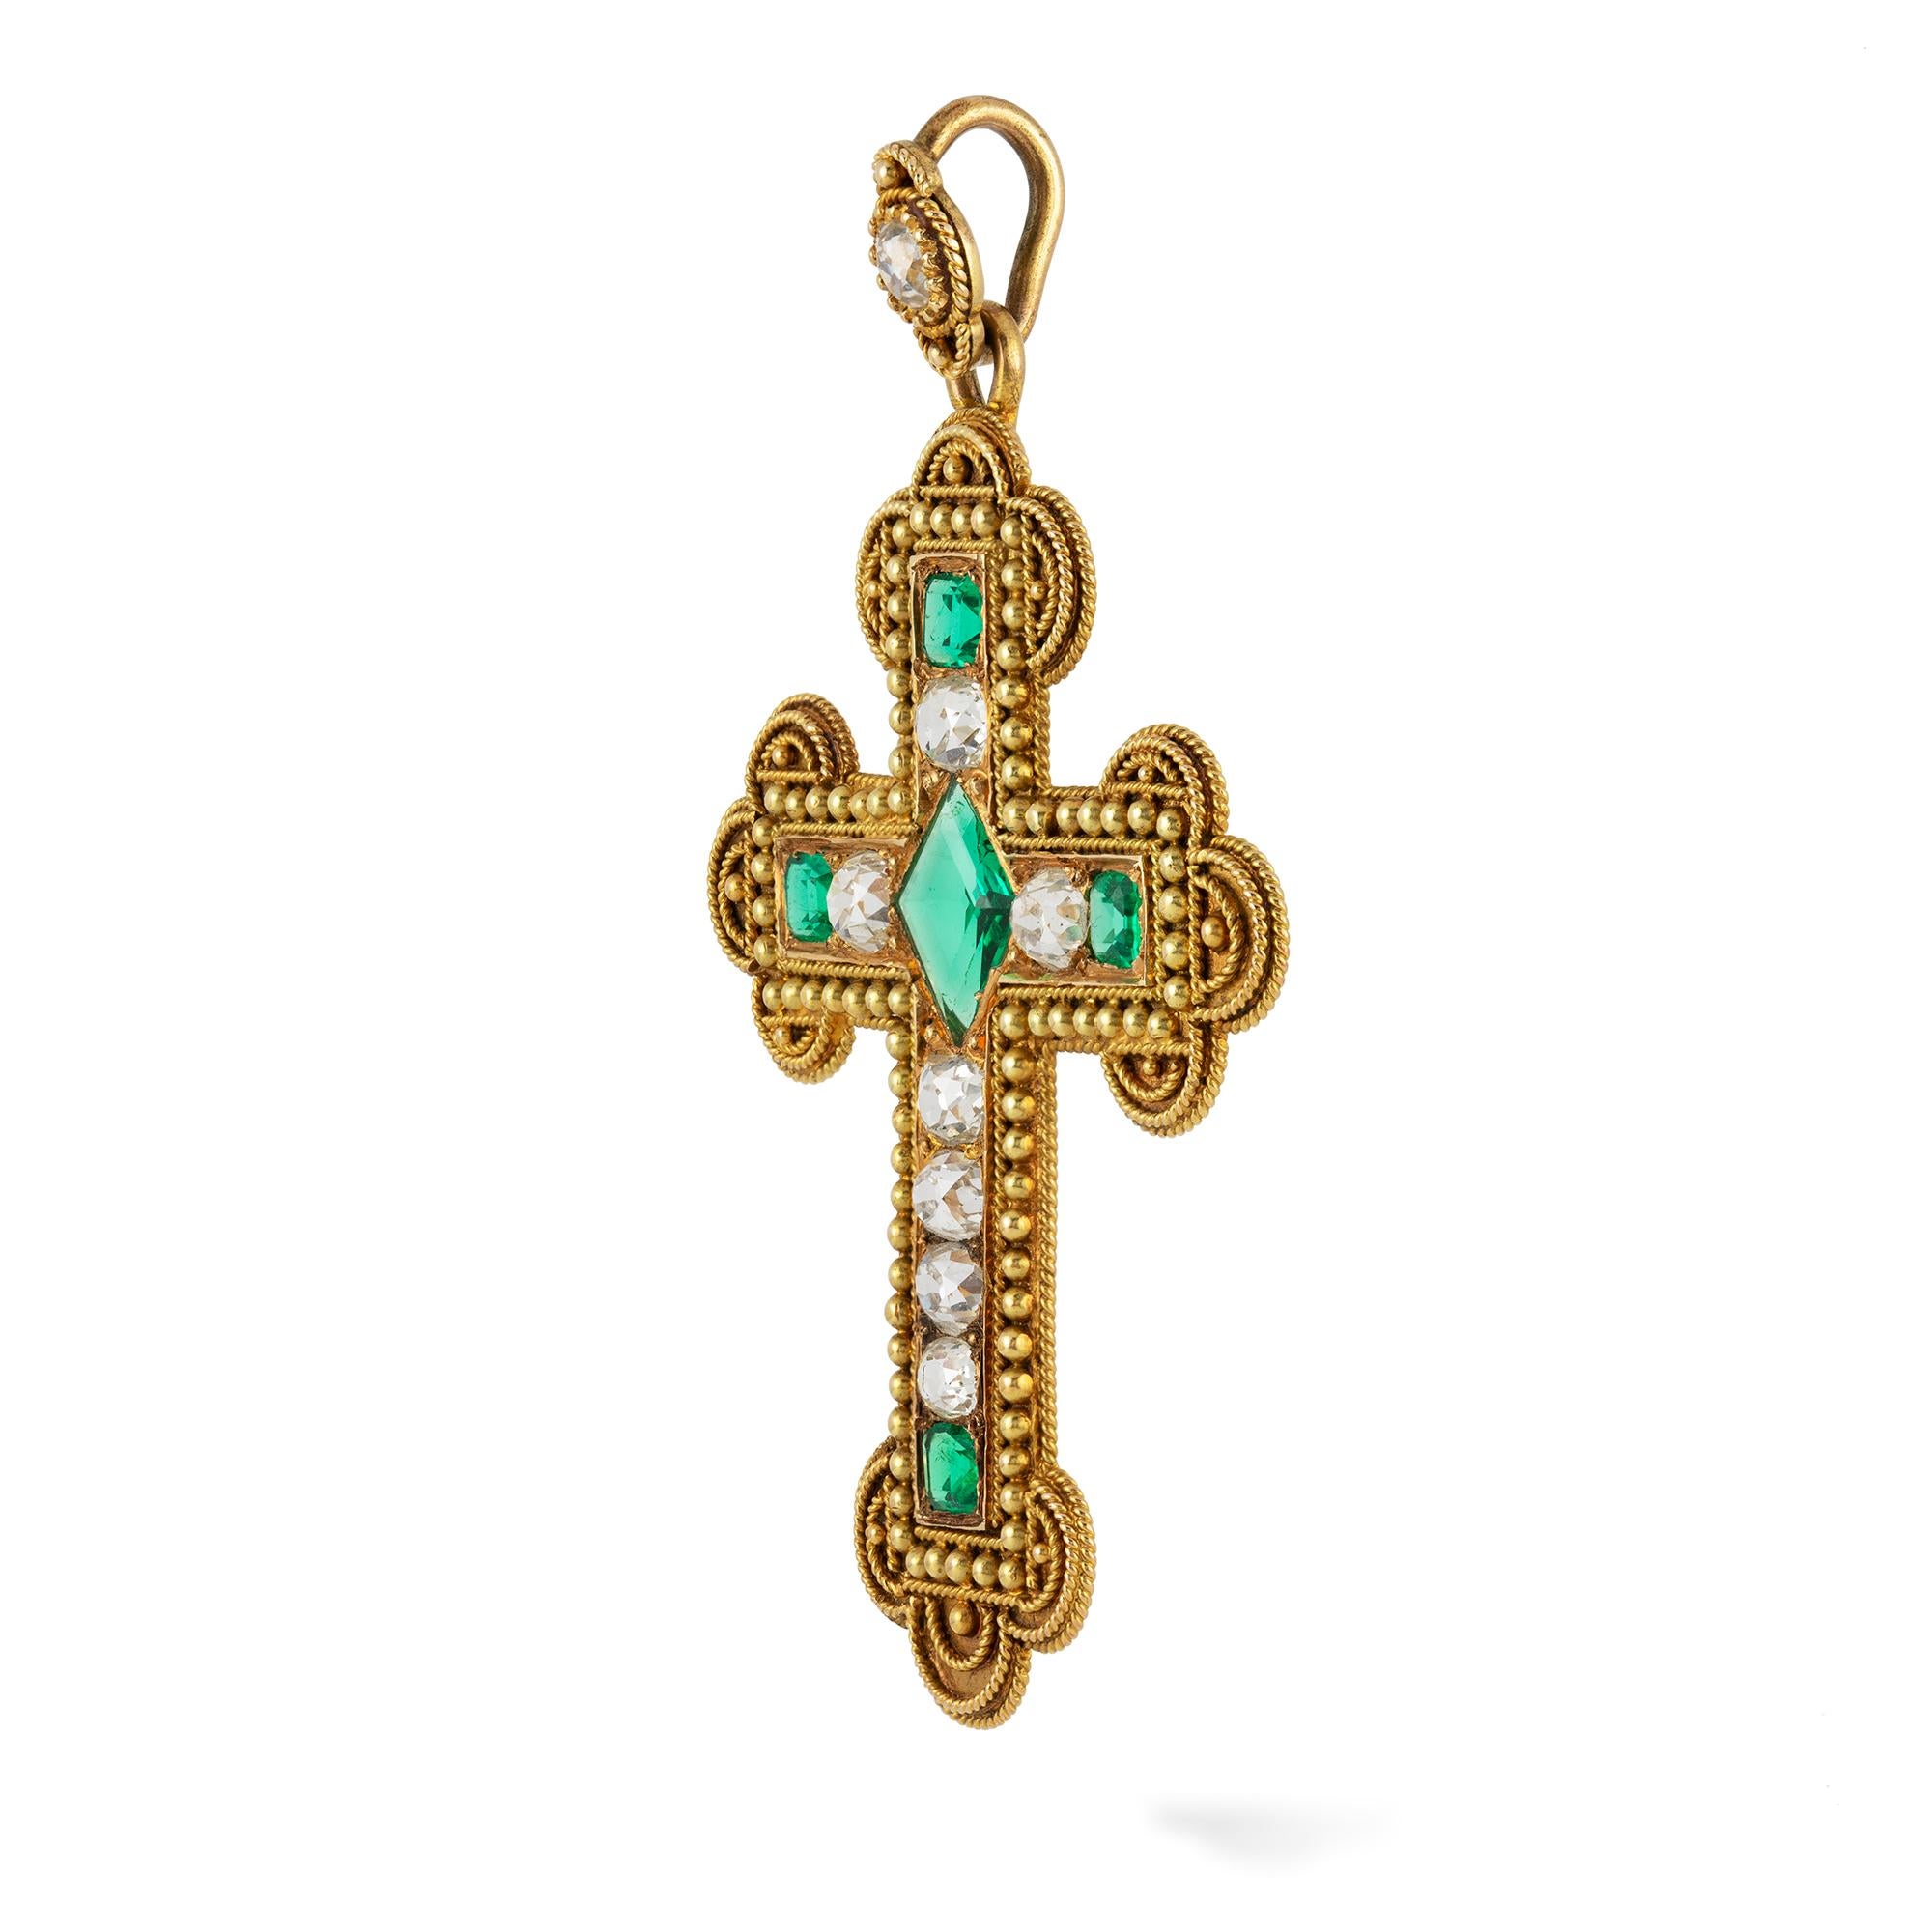 A Victorian Archaeological Revival emerald and diamond trefoil cross pendant, of archaeological revival style, to the centre a kite-shaped emerald estimated to weigh 1 carat, the arms set with old-cut diamonds and cushion-shaped emeralds, surrounded